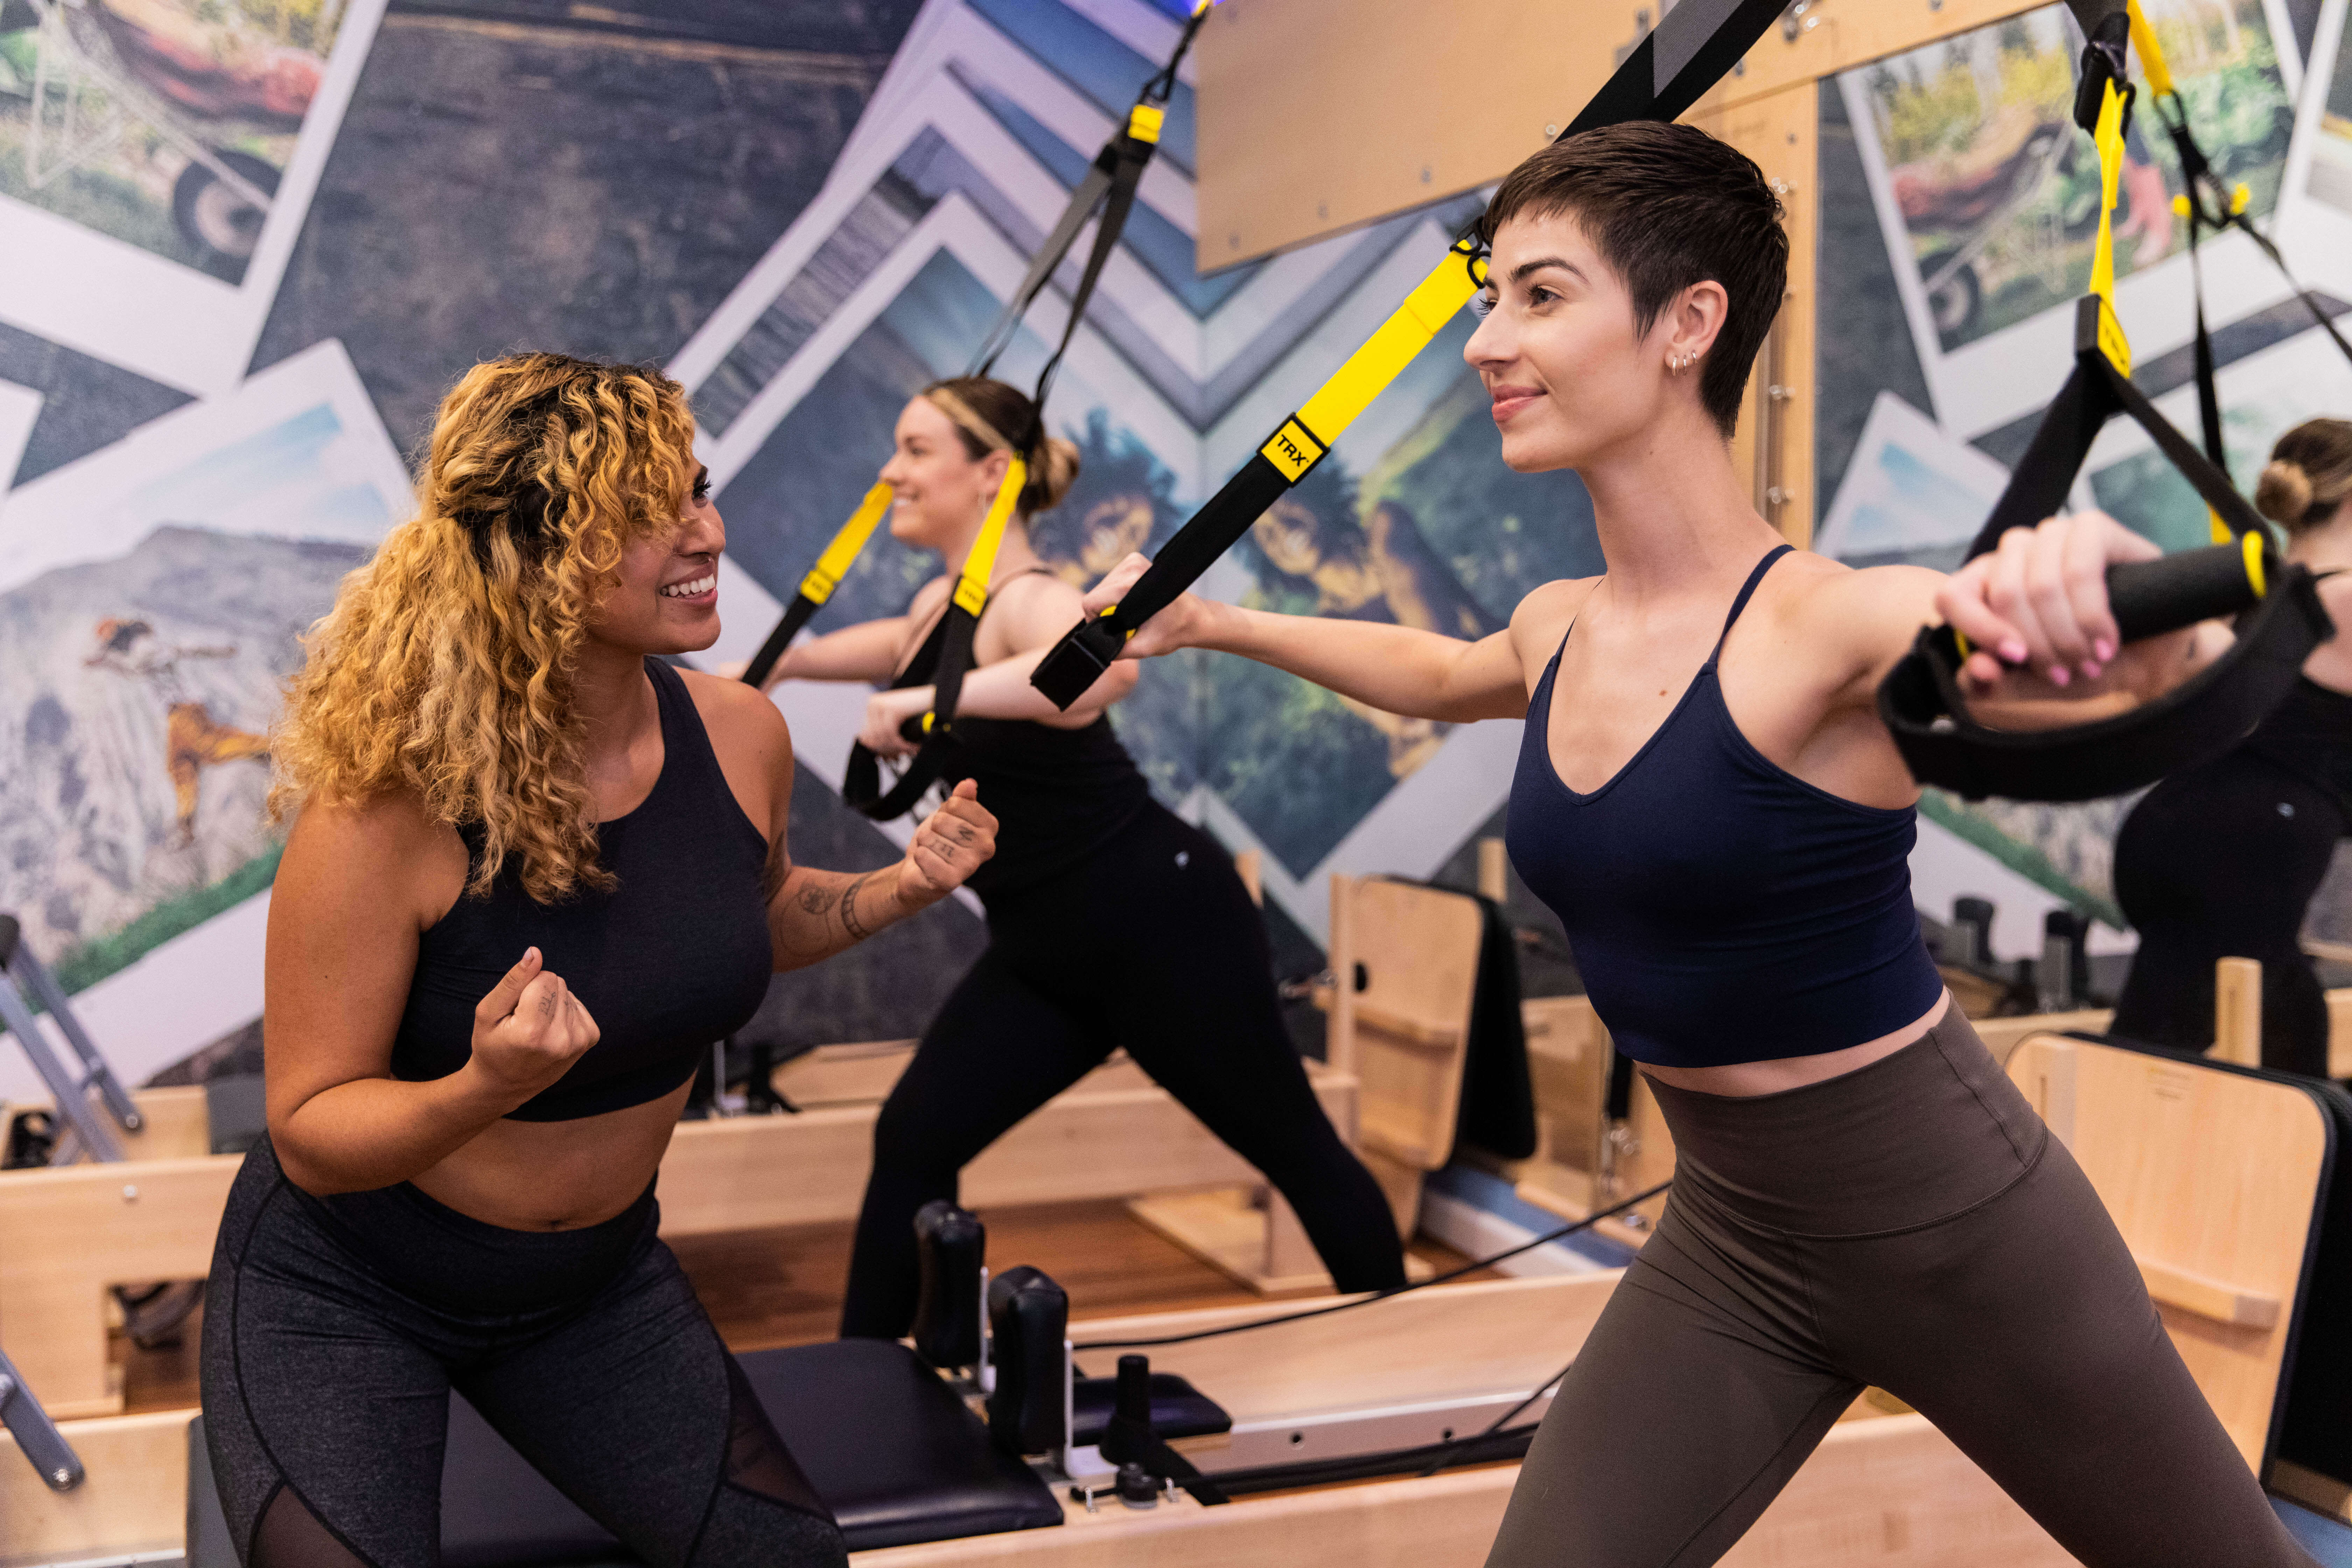 Put your Pilates Body to the test with TRX at a CP Suspend Class! 🔥 Would  you rather: 💪 Work your arms 🔥 Work your legs 💙 Work them BOTH